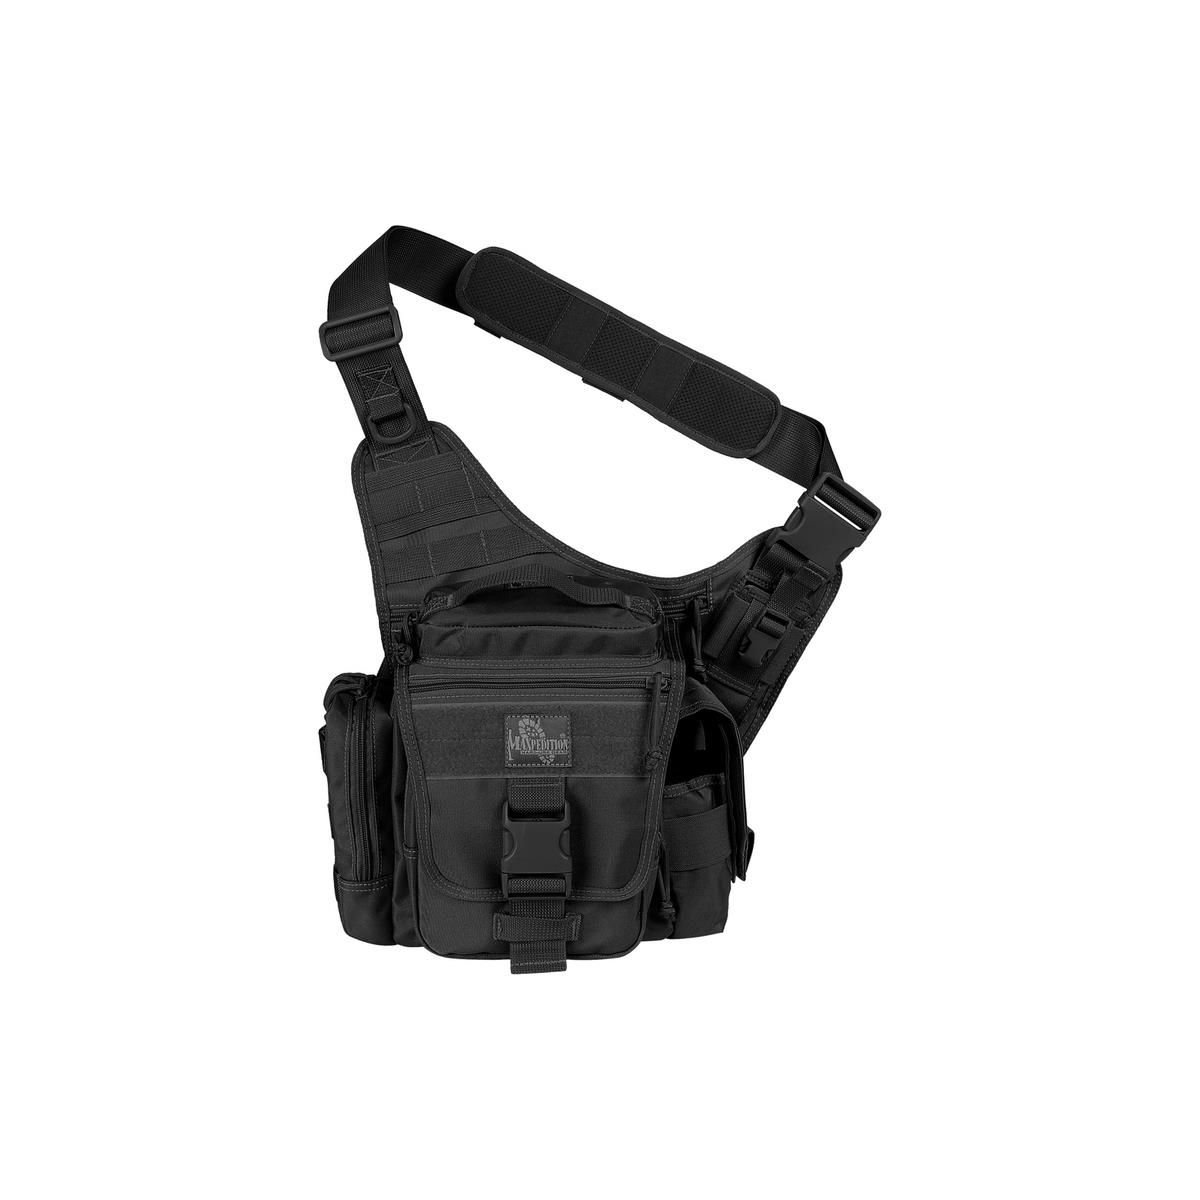 Image of Maxpedition Jumbo L.E.O. Versipack Concealed Carry Bag